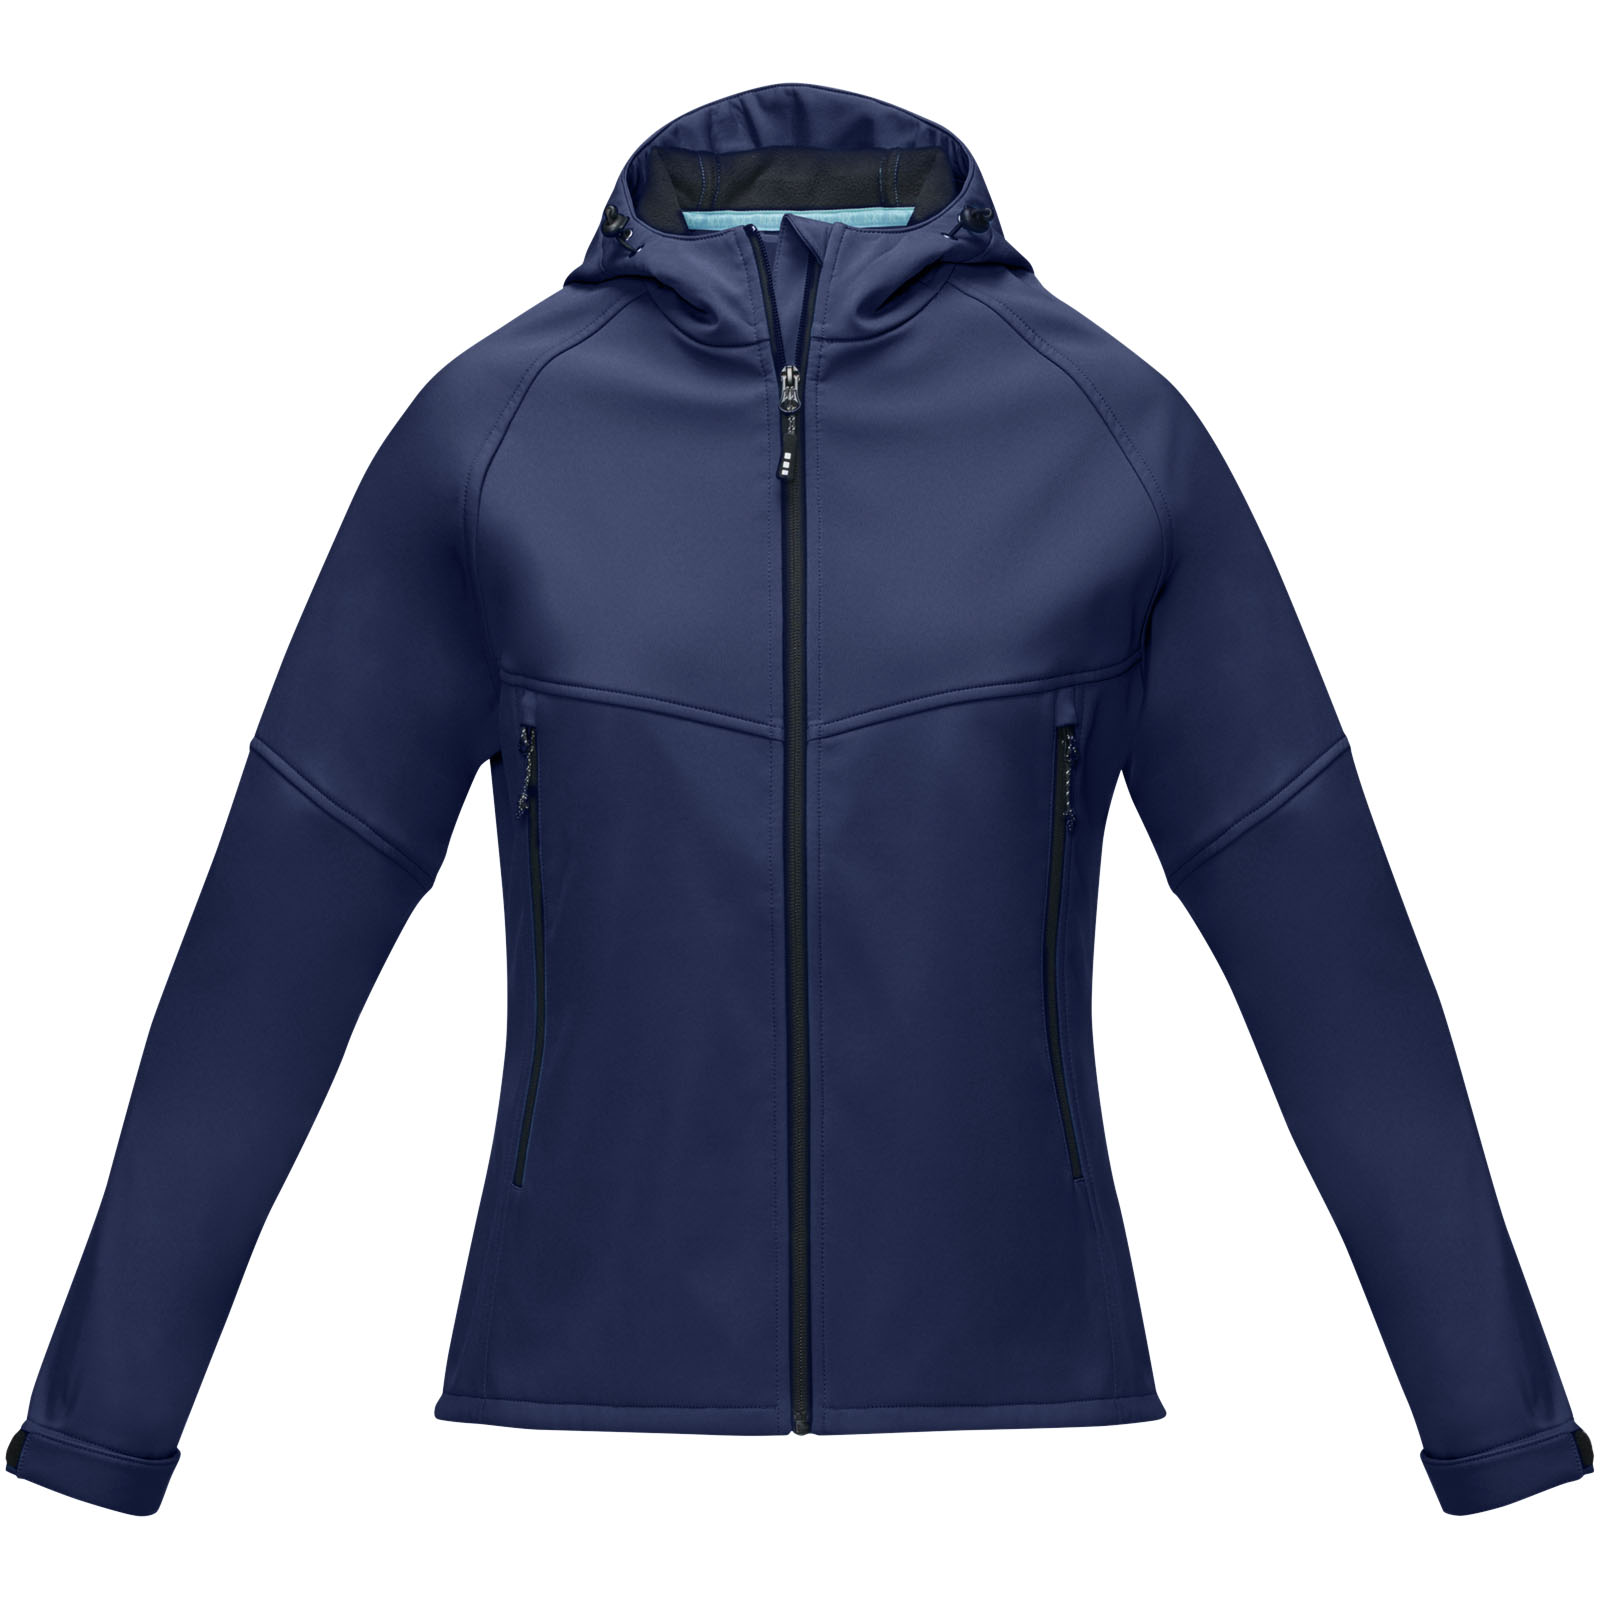 Advertising Jackets - Coltan women’s GRS recycled softshell jacket - 1